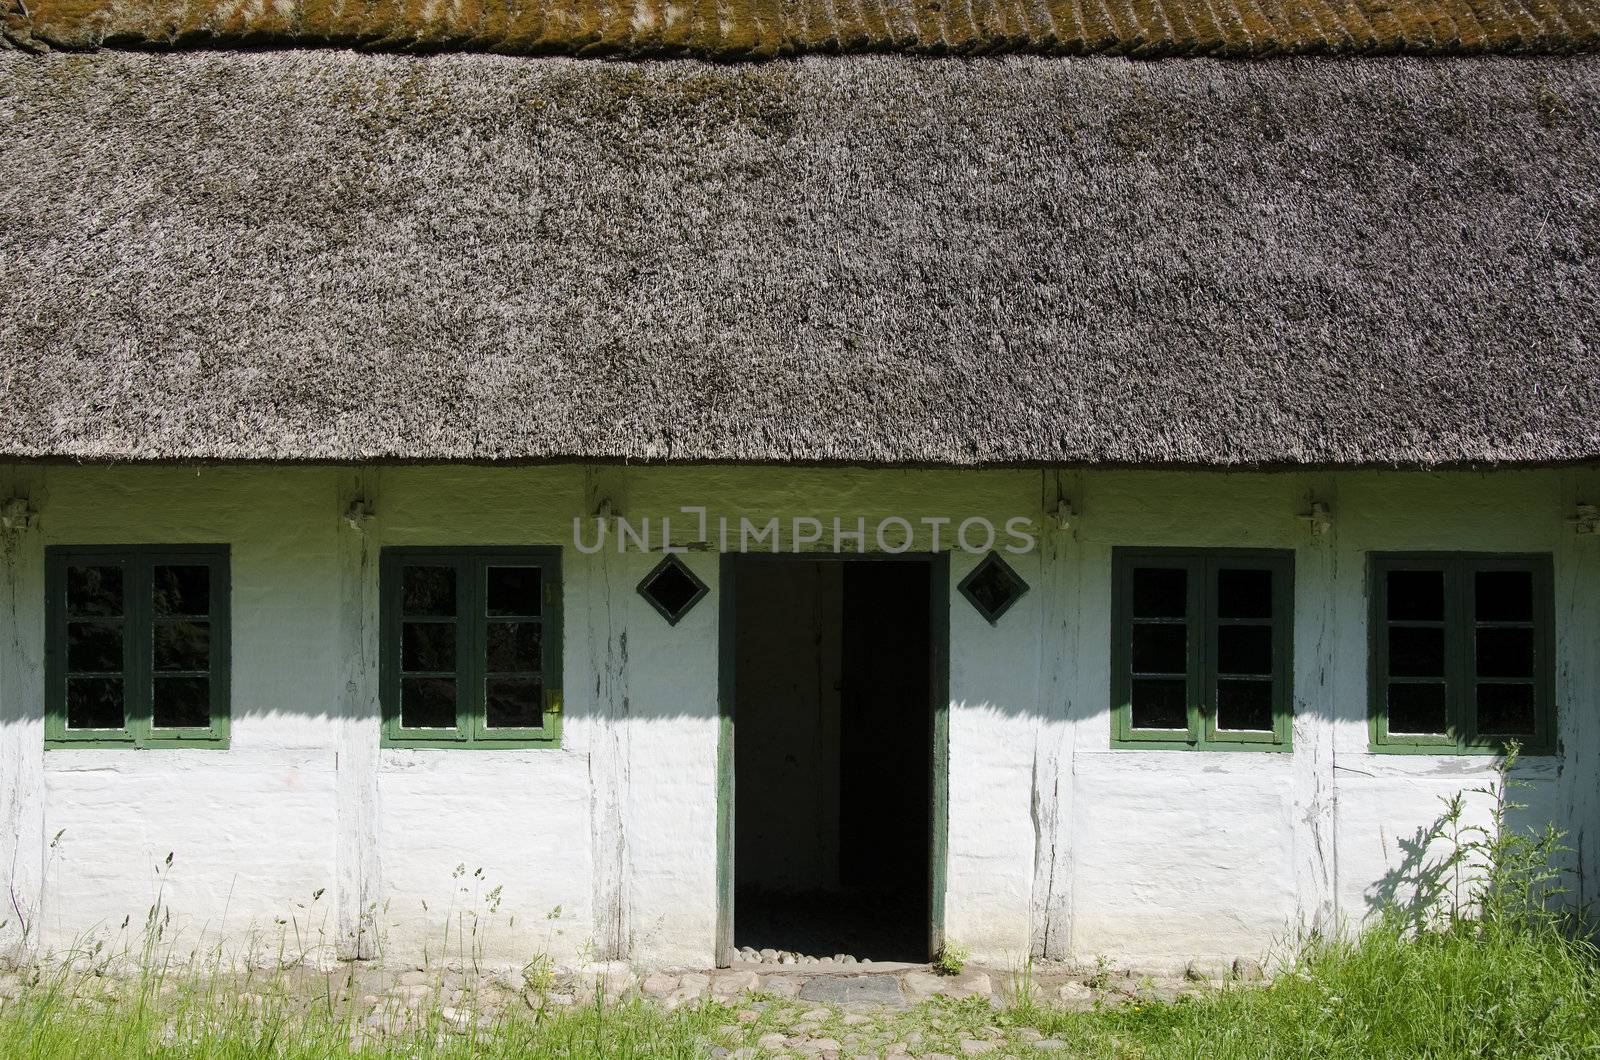 Medieval farm house in Denmark with thatched roof